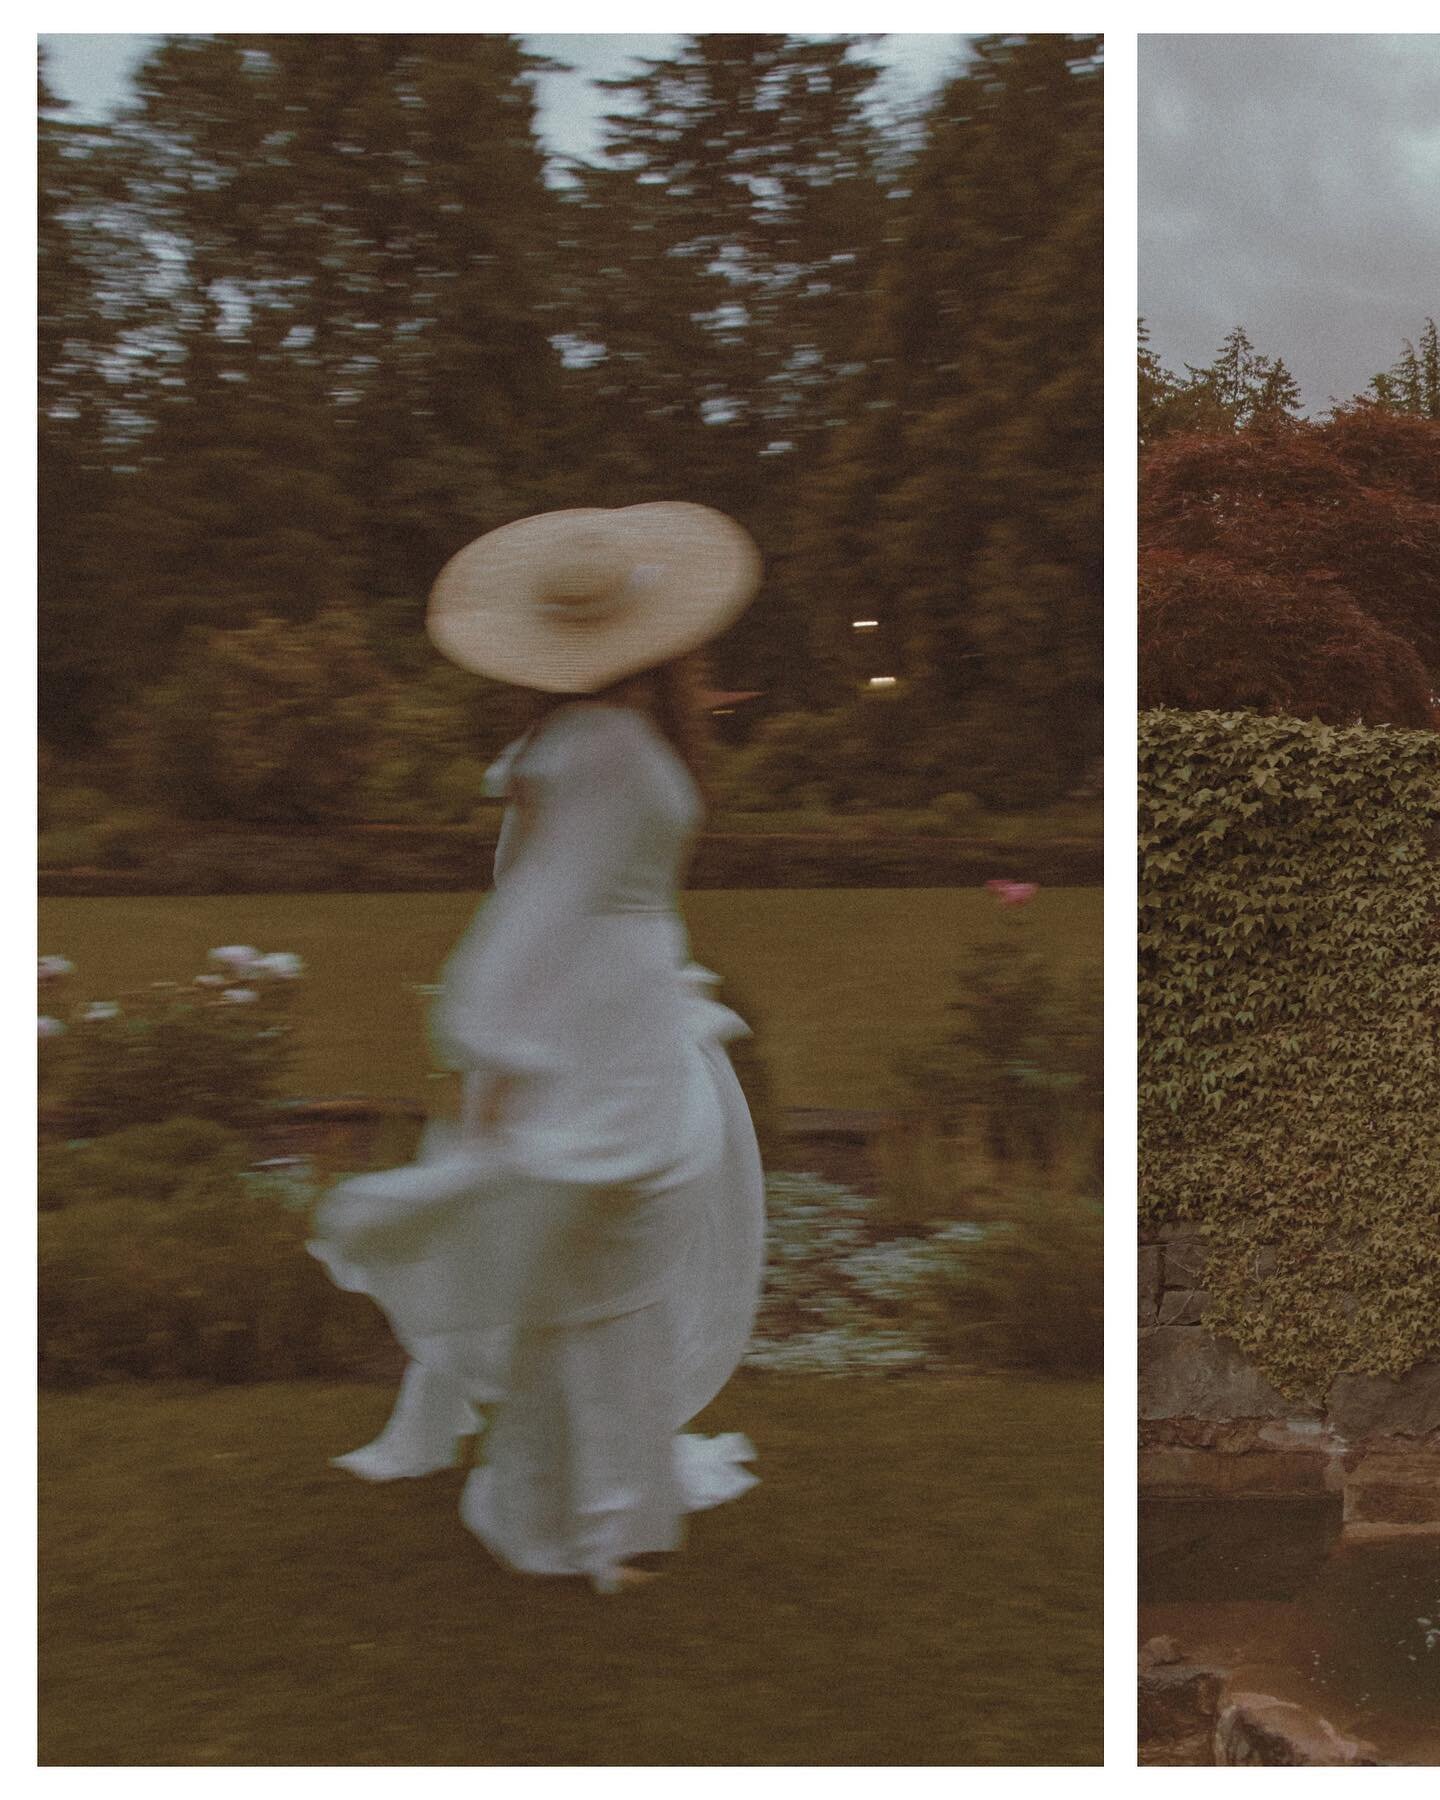 A few of my fav moments that felt so poetic&mdash;a Monet moment ✨

Photography/styling: @avecvousphoto
Model: @alyssahmrs
HMUA: @event_cosmetics
Hair extensions: @yours_extensions
Silk hair sparkles: @luckylocks_pride
Florals: @gregkhng
:
:
:
:
:
:
